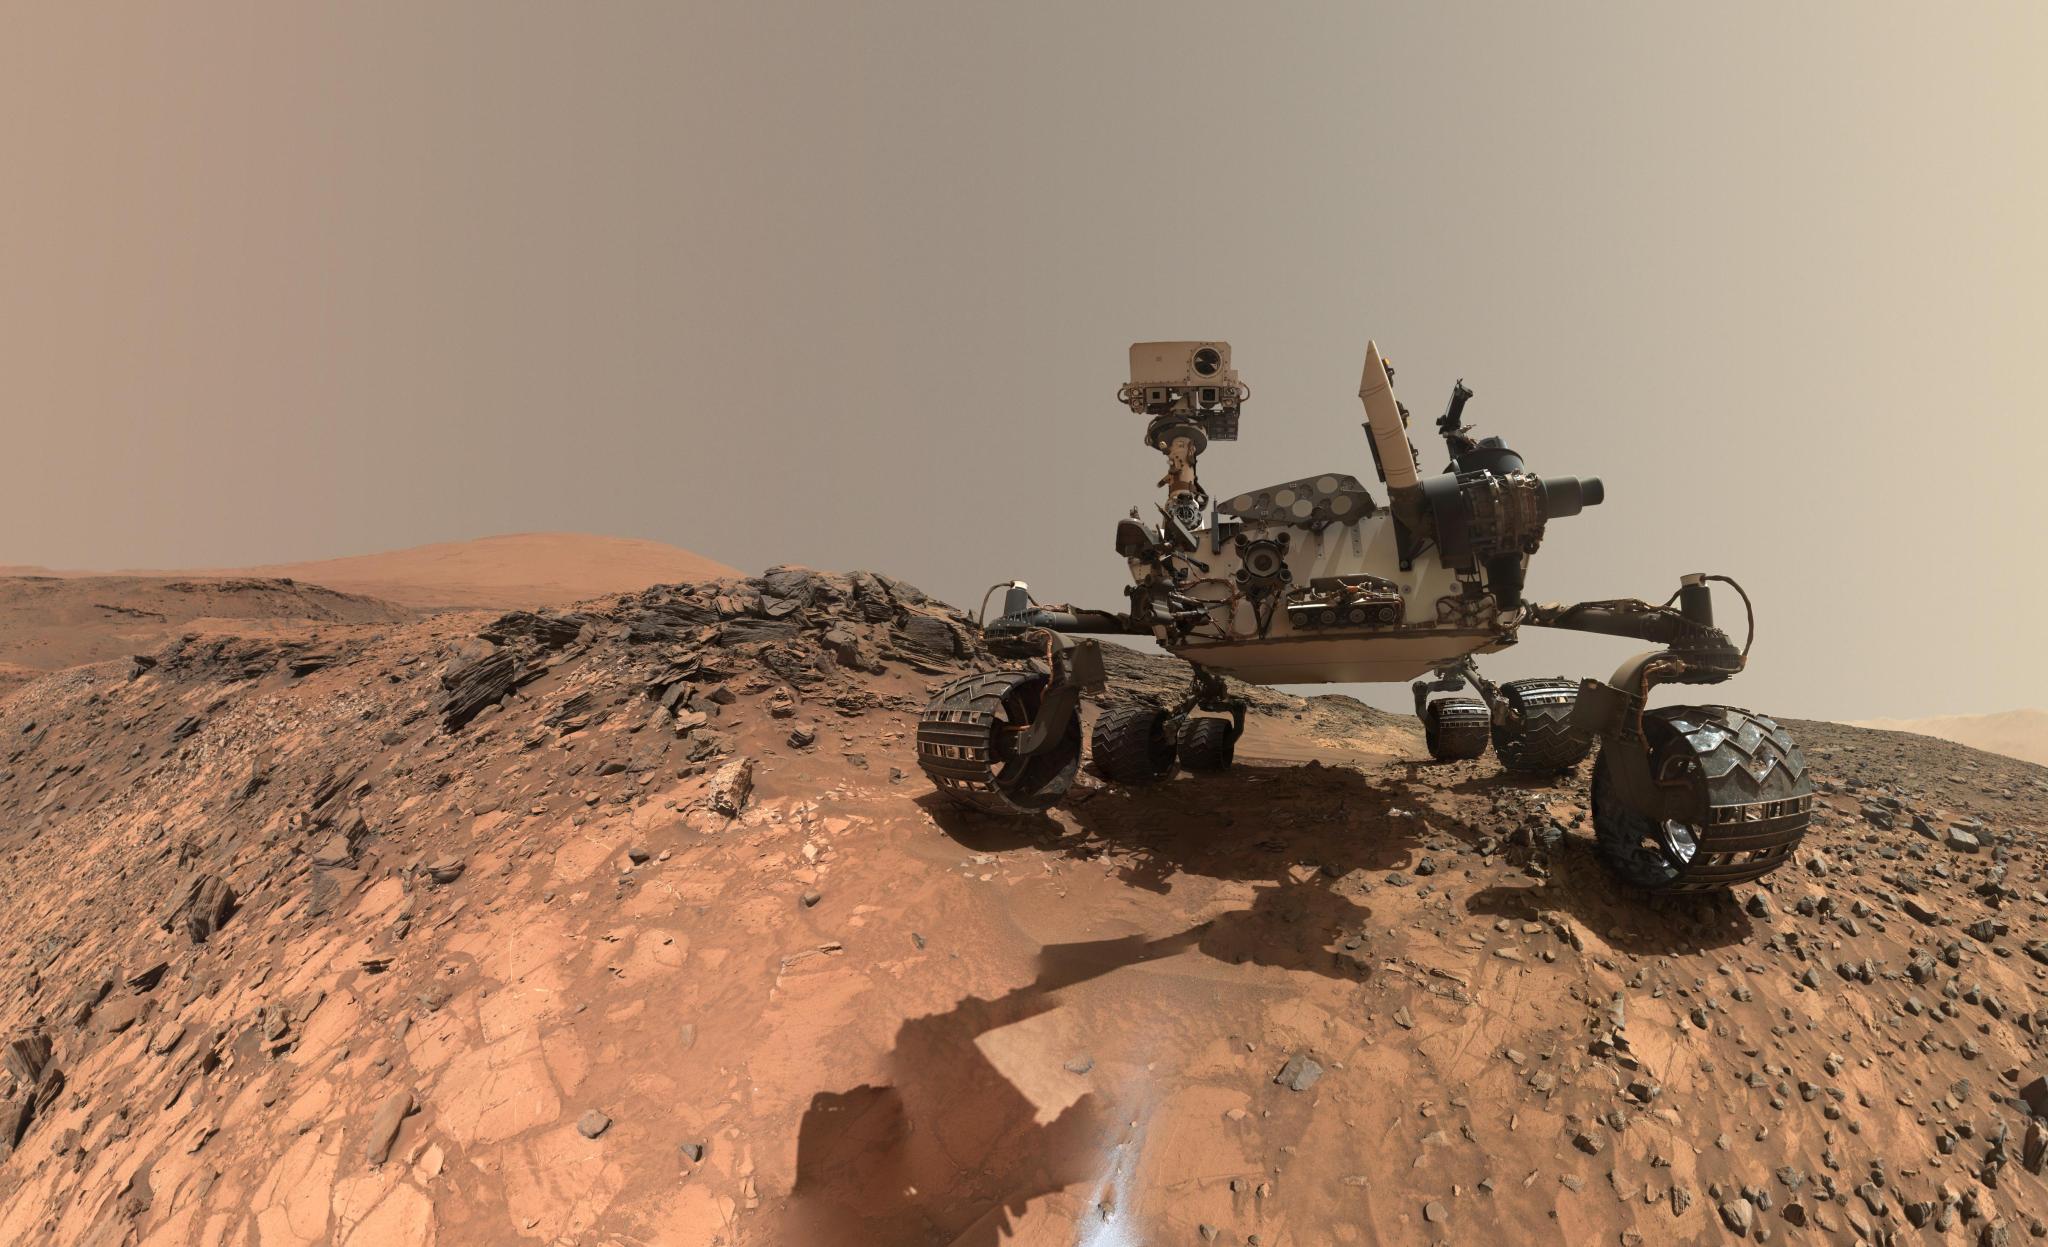 This low-angle self-portrait of NASA's Curiosity Mars rover shows the vehicle at the site from which it reached down to drill in